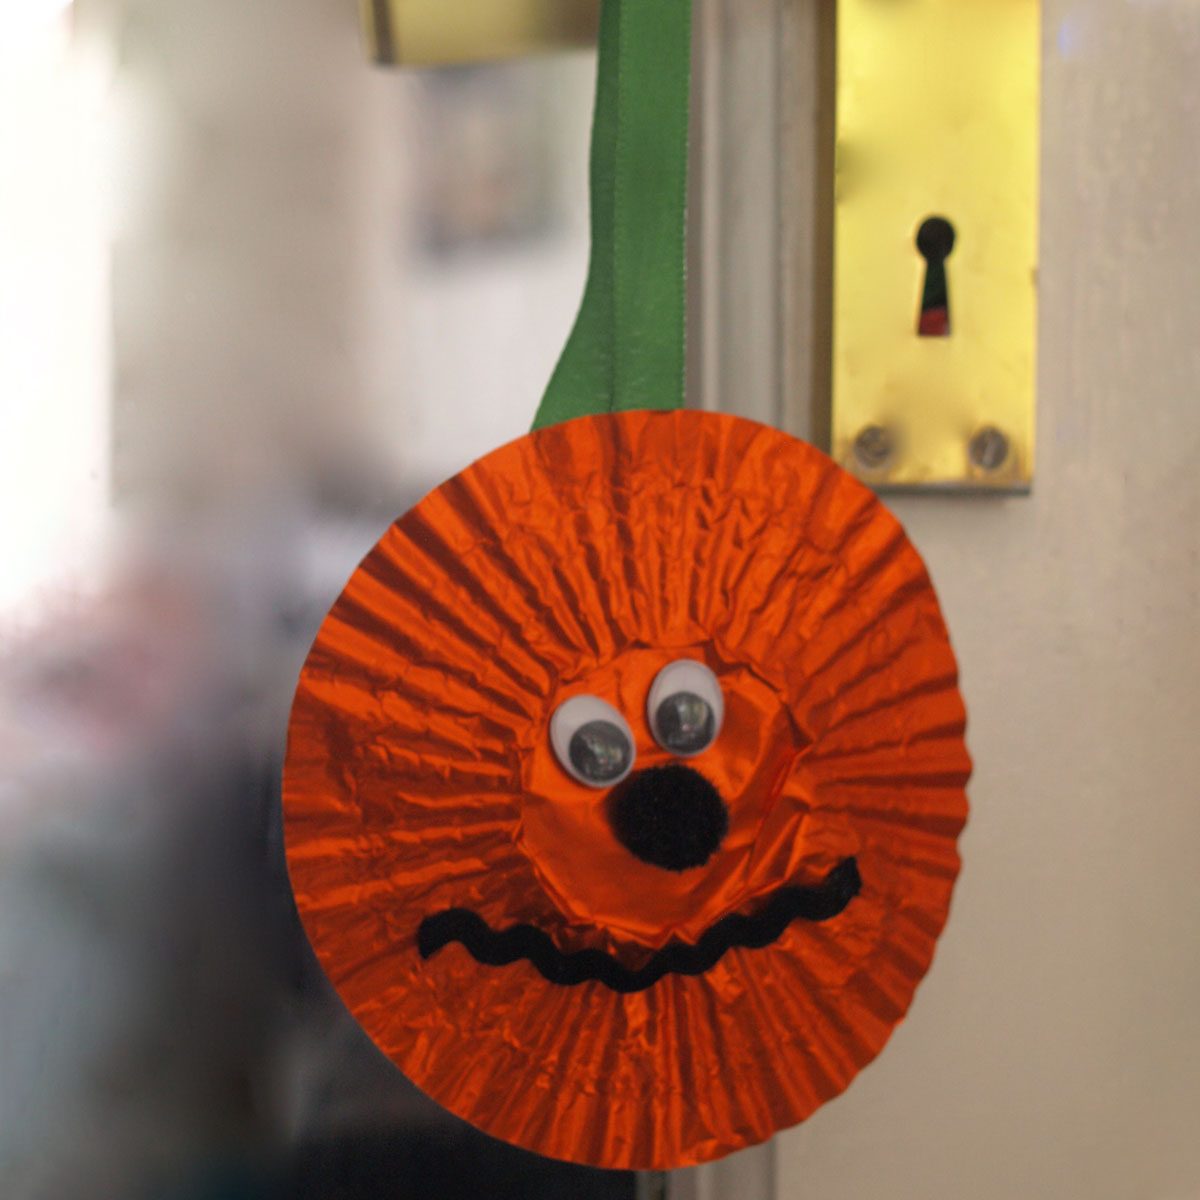 31 Halloween Crafts with Googly Eyes